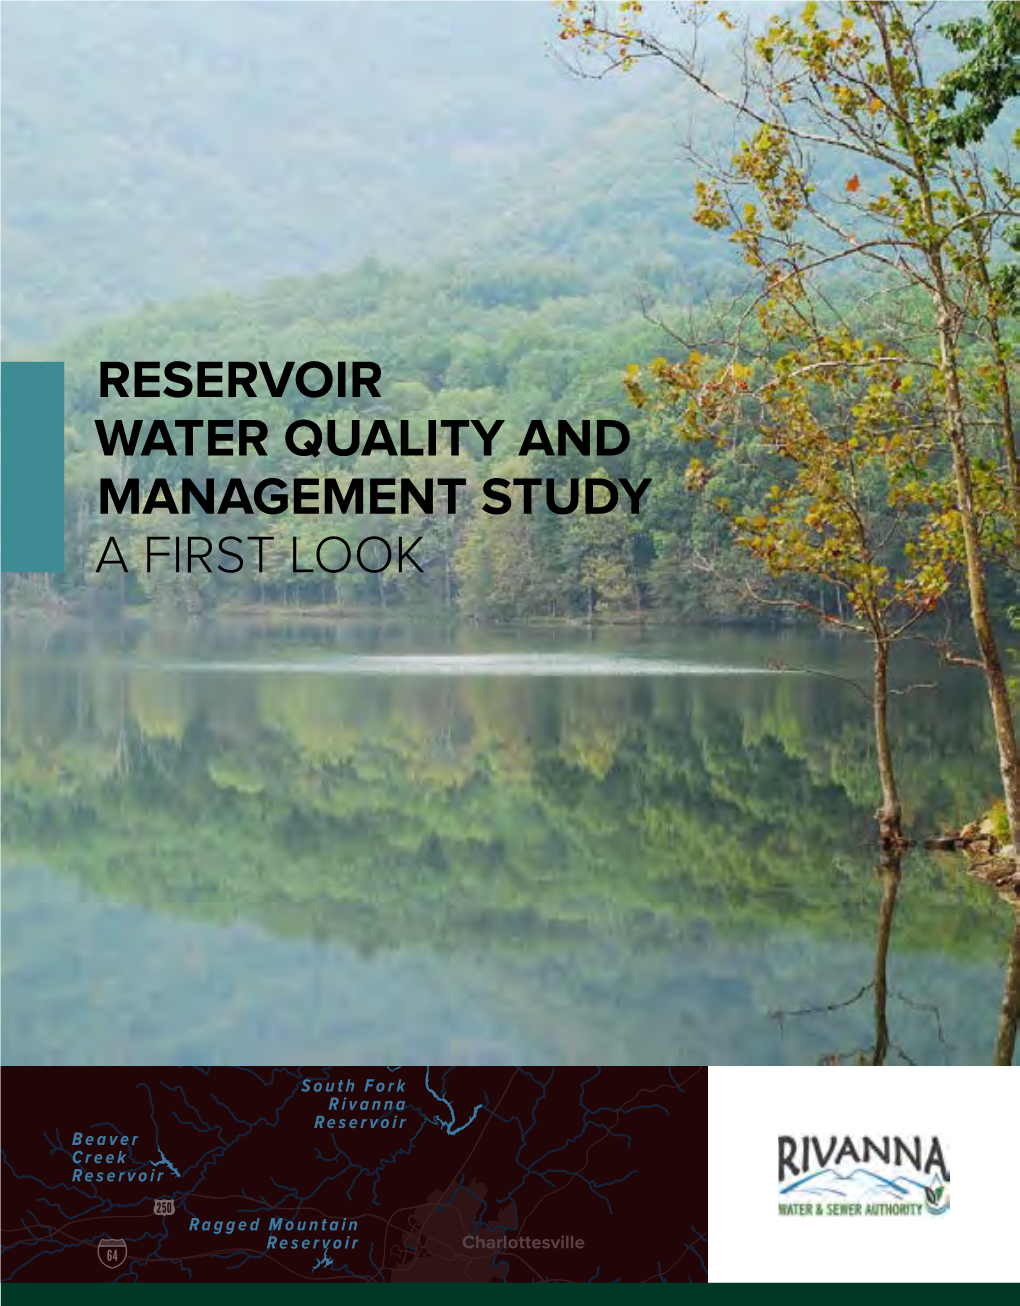 Draft Reservoir Water Quality and Management Study a First Look